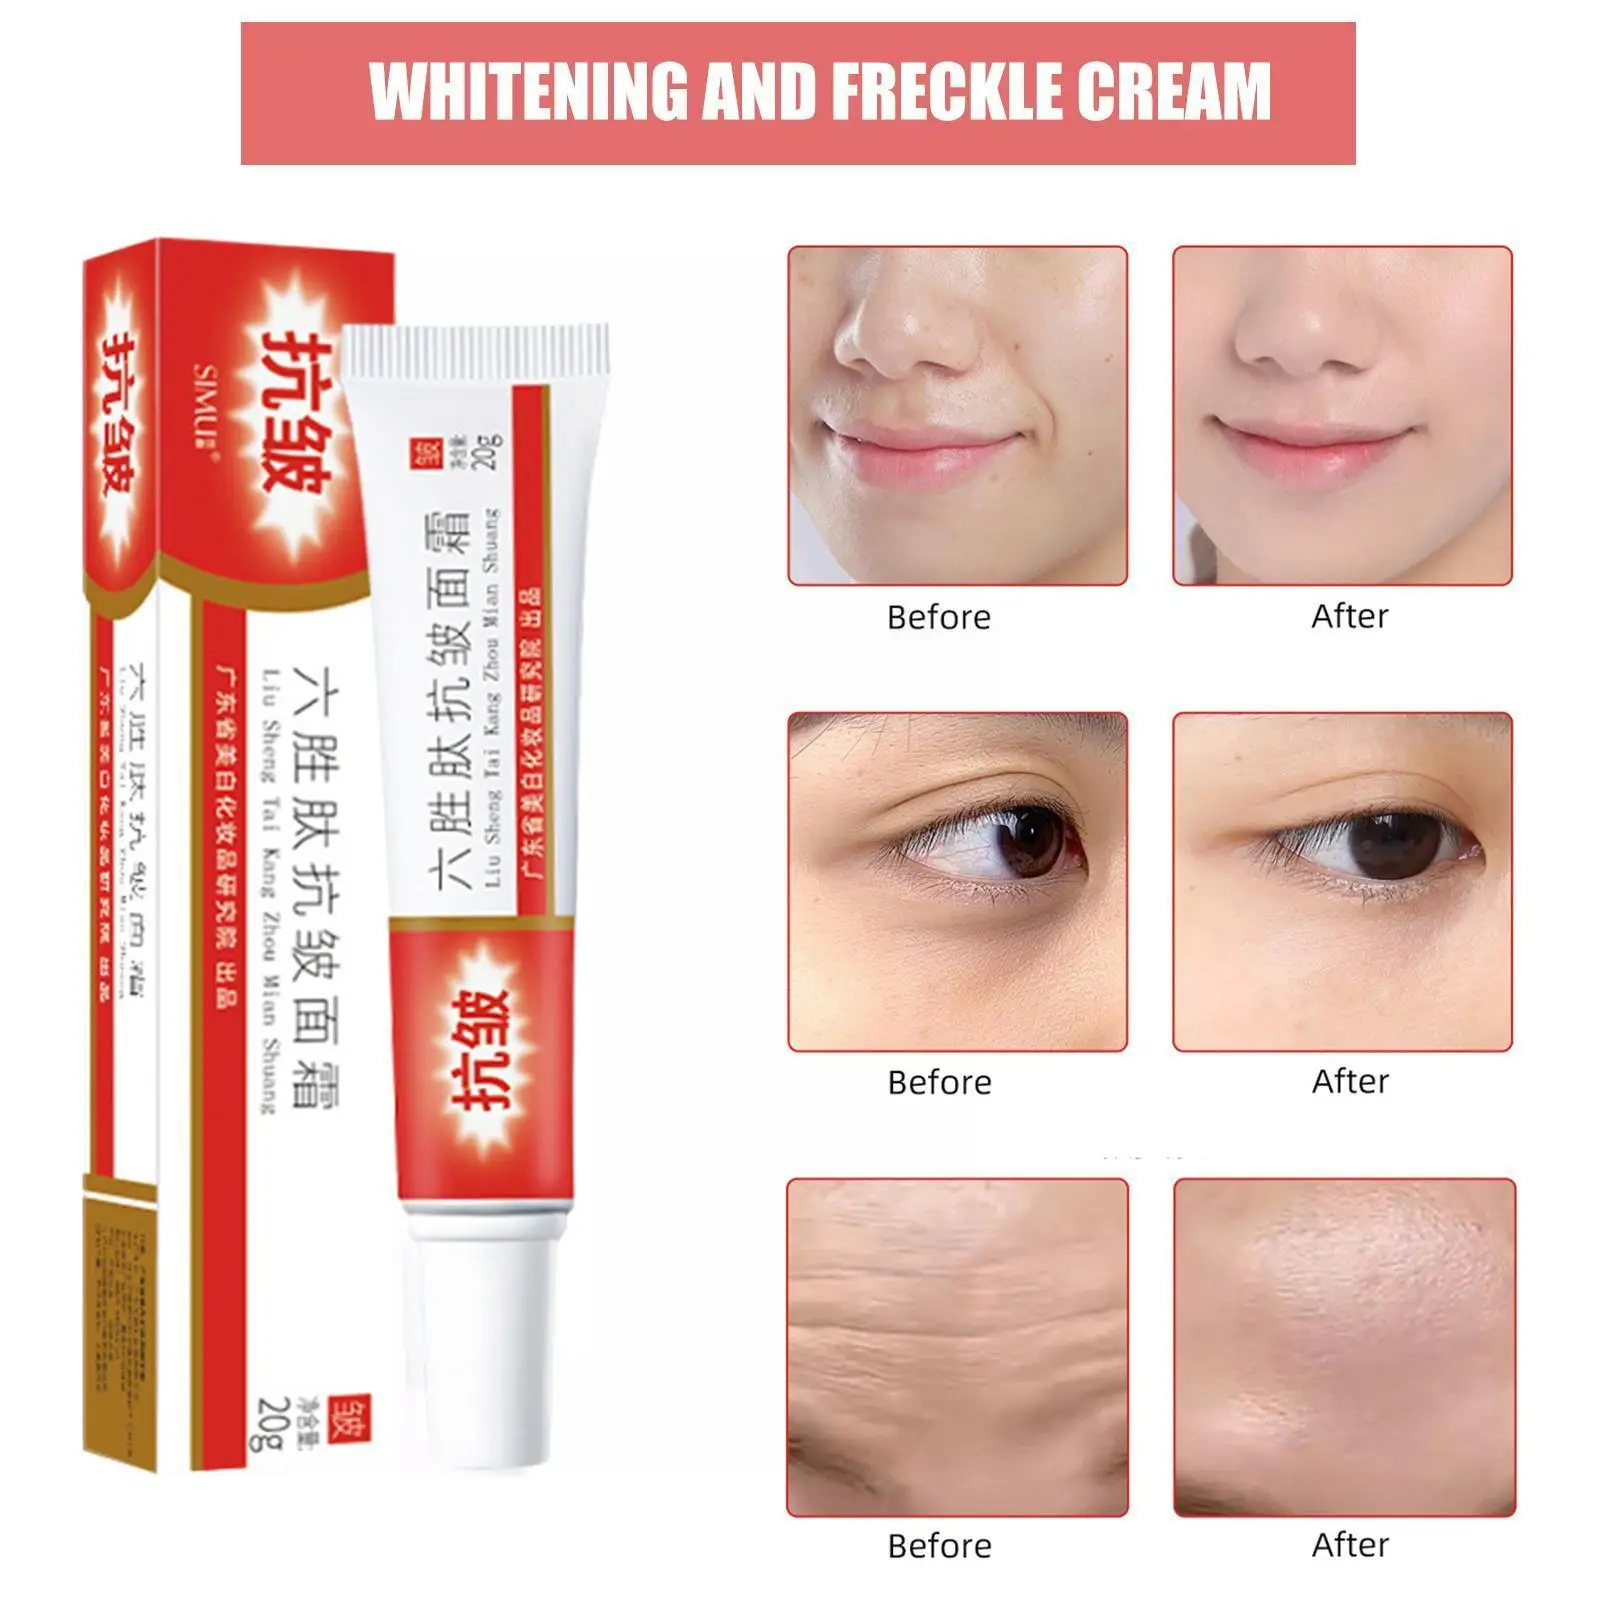 

Whitening Anti Wrinkle And Lightening Freckle Cream Care Care Skin And Cream Facial Product Essence Firming Moisturizing H4K6